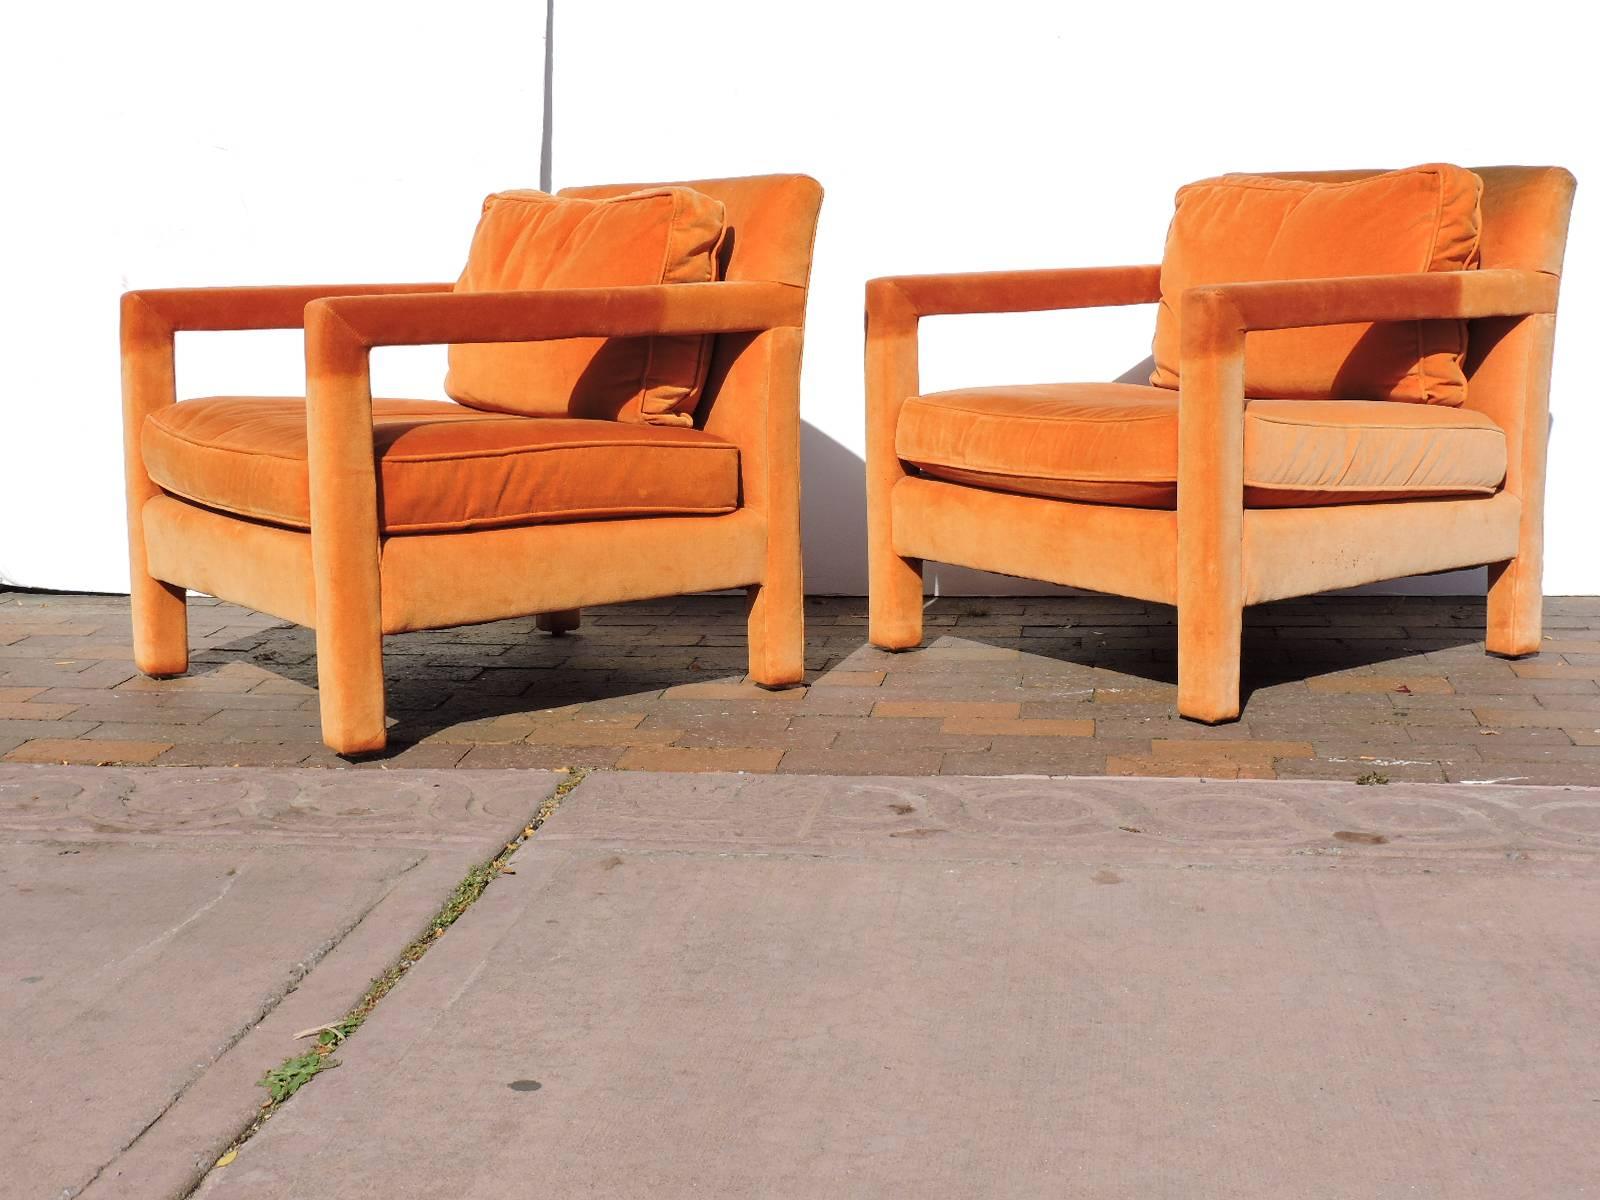 A great looking and substantial size pair of original tangerine orange blended cotton velvet felt fully upholstered parsons lounge chairs by Flair Division of Bernhardt Furniture Company in the style of Milo Baughman.